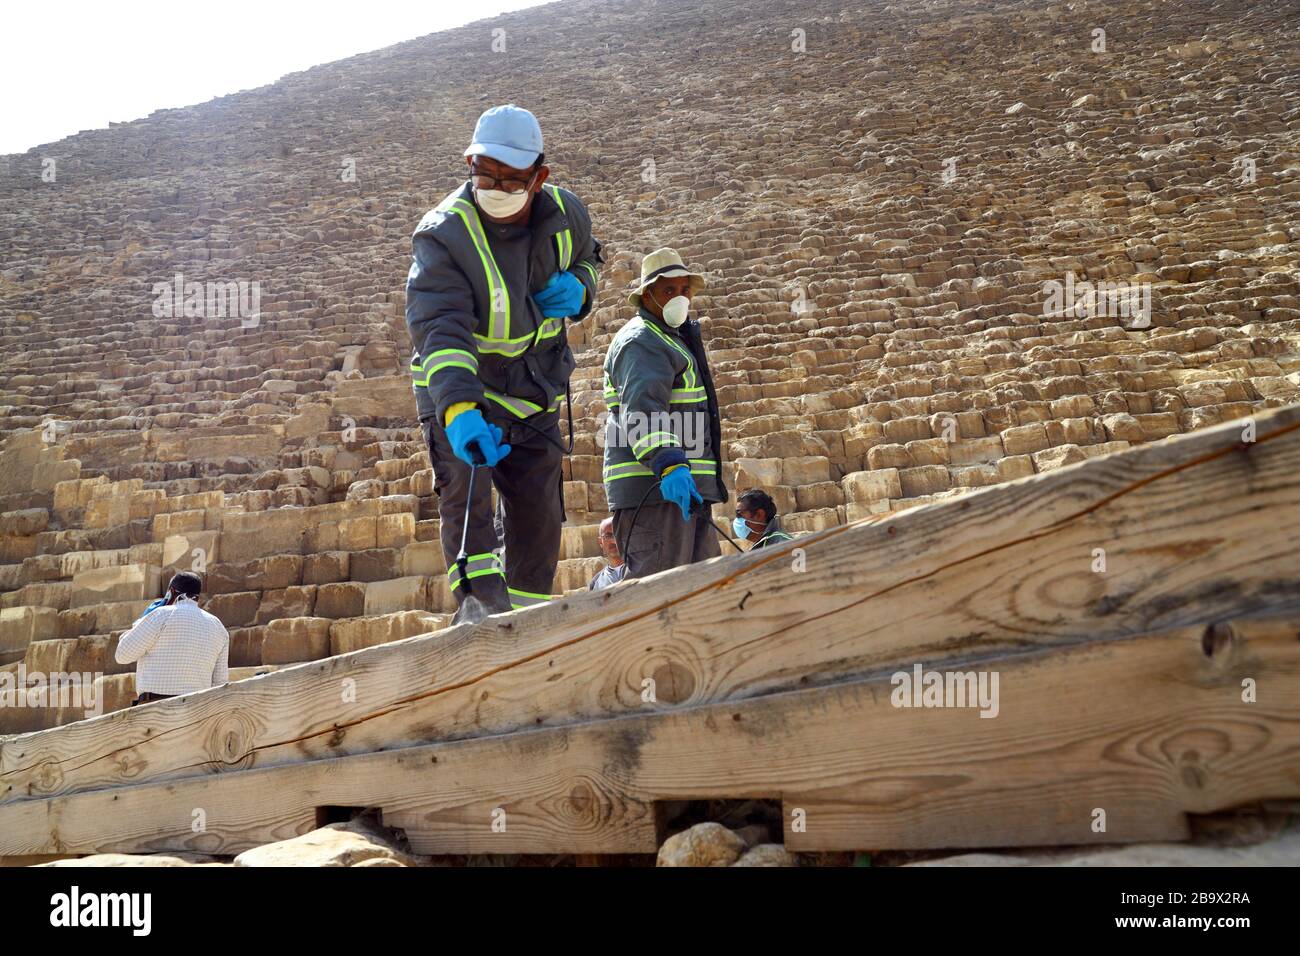 (200325) -- GIZA, March 25, 2020 (Xinhua) -- A staff member disinfects near the Pyramids in Giza, Egypt, March 25, 2020. Egypt announced on Tuesday that one COVID-19 case died and 36 new cases were detected, bringing the total number of cases in the country to 402. (Xinhua/Ahmed Gomaa) Stock Photo